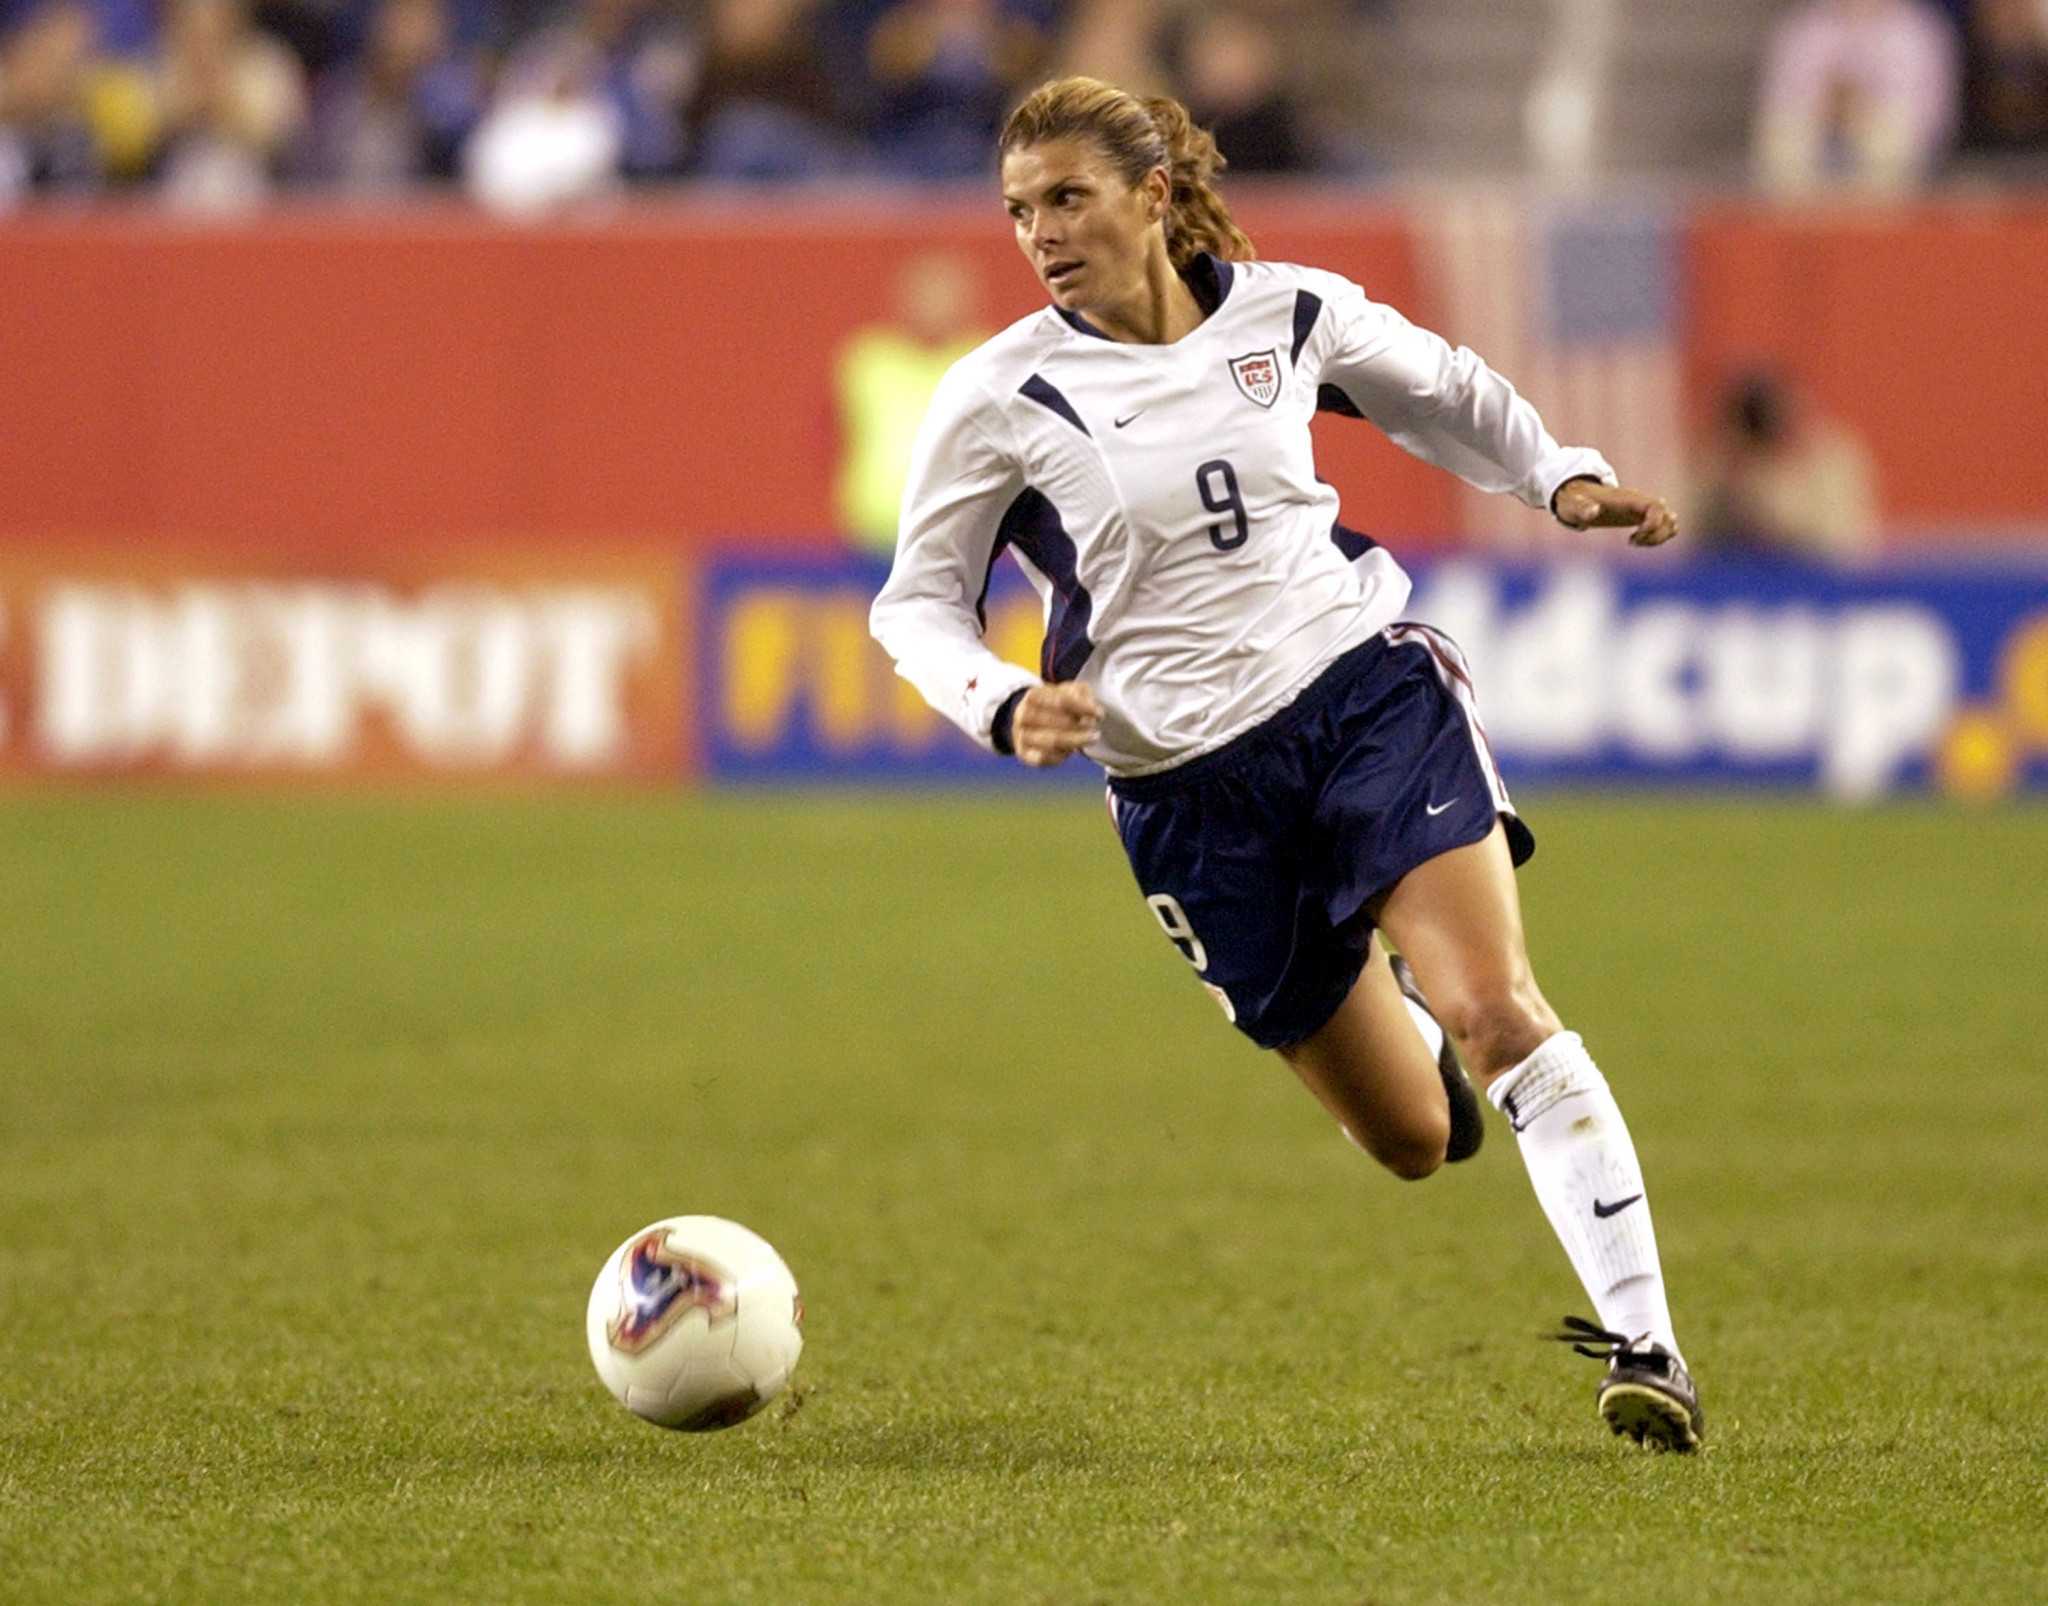 Two-time Olympic gold medallist and double World Cup winner Mia Hamm is an idol to many ©Getty Images